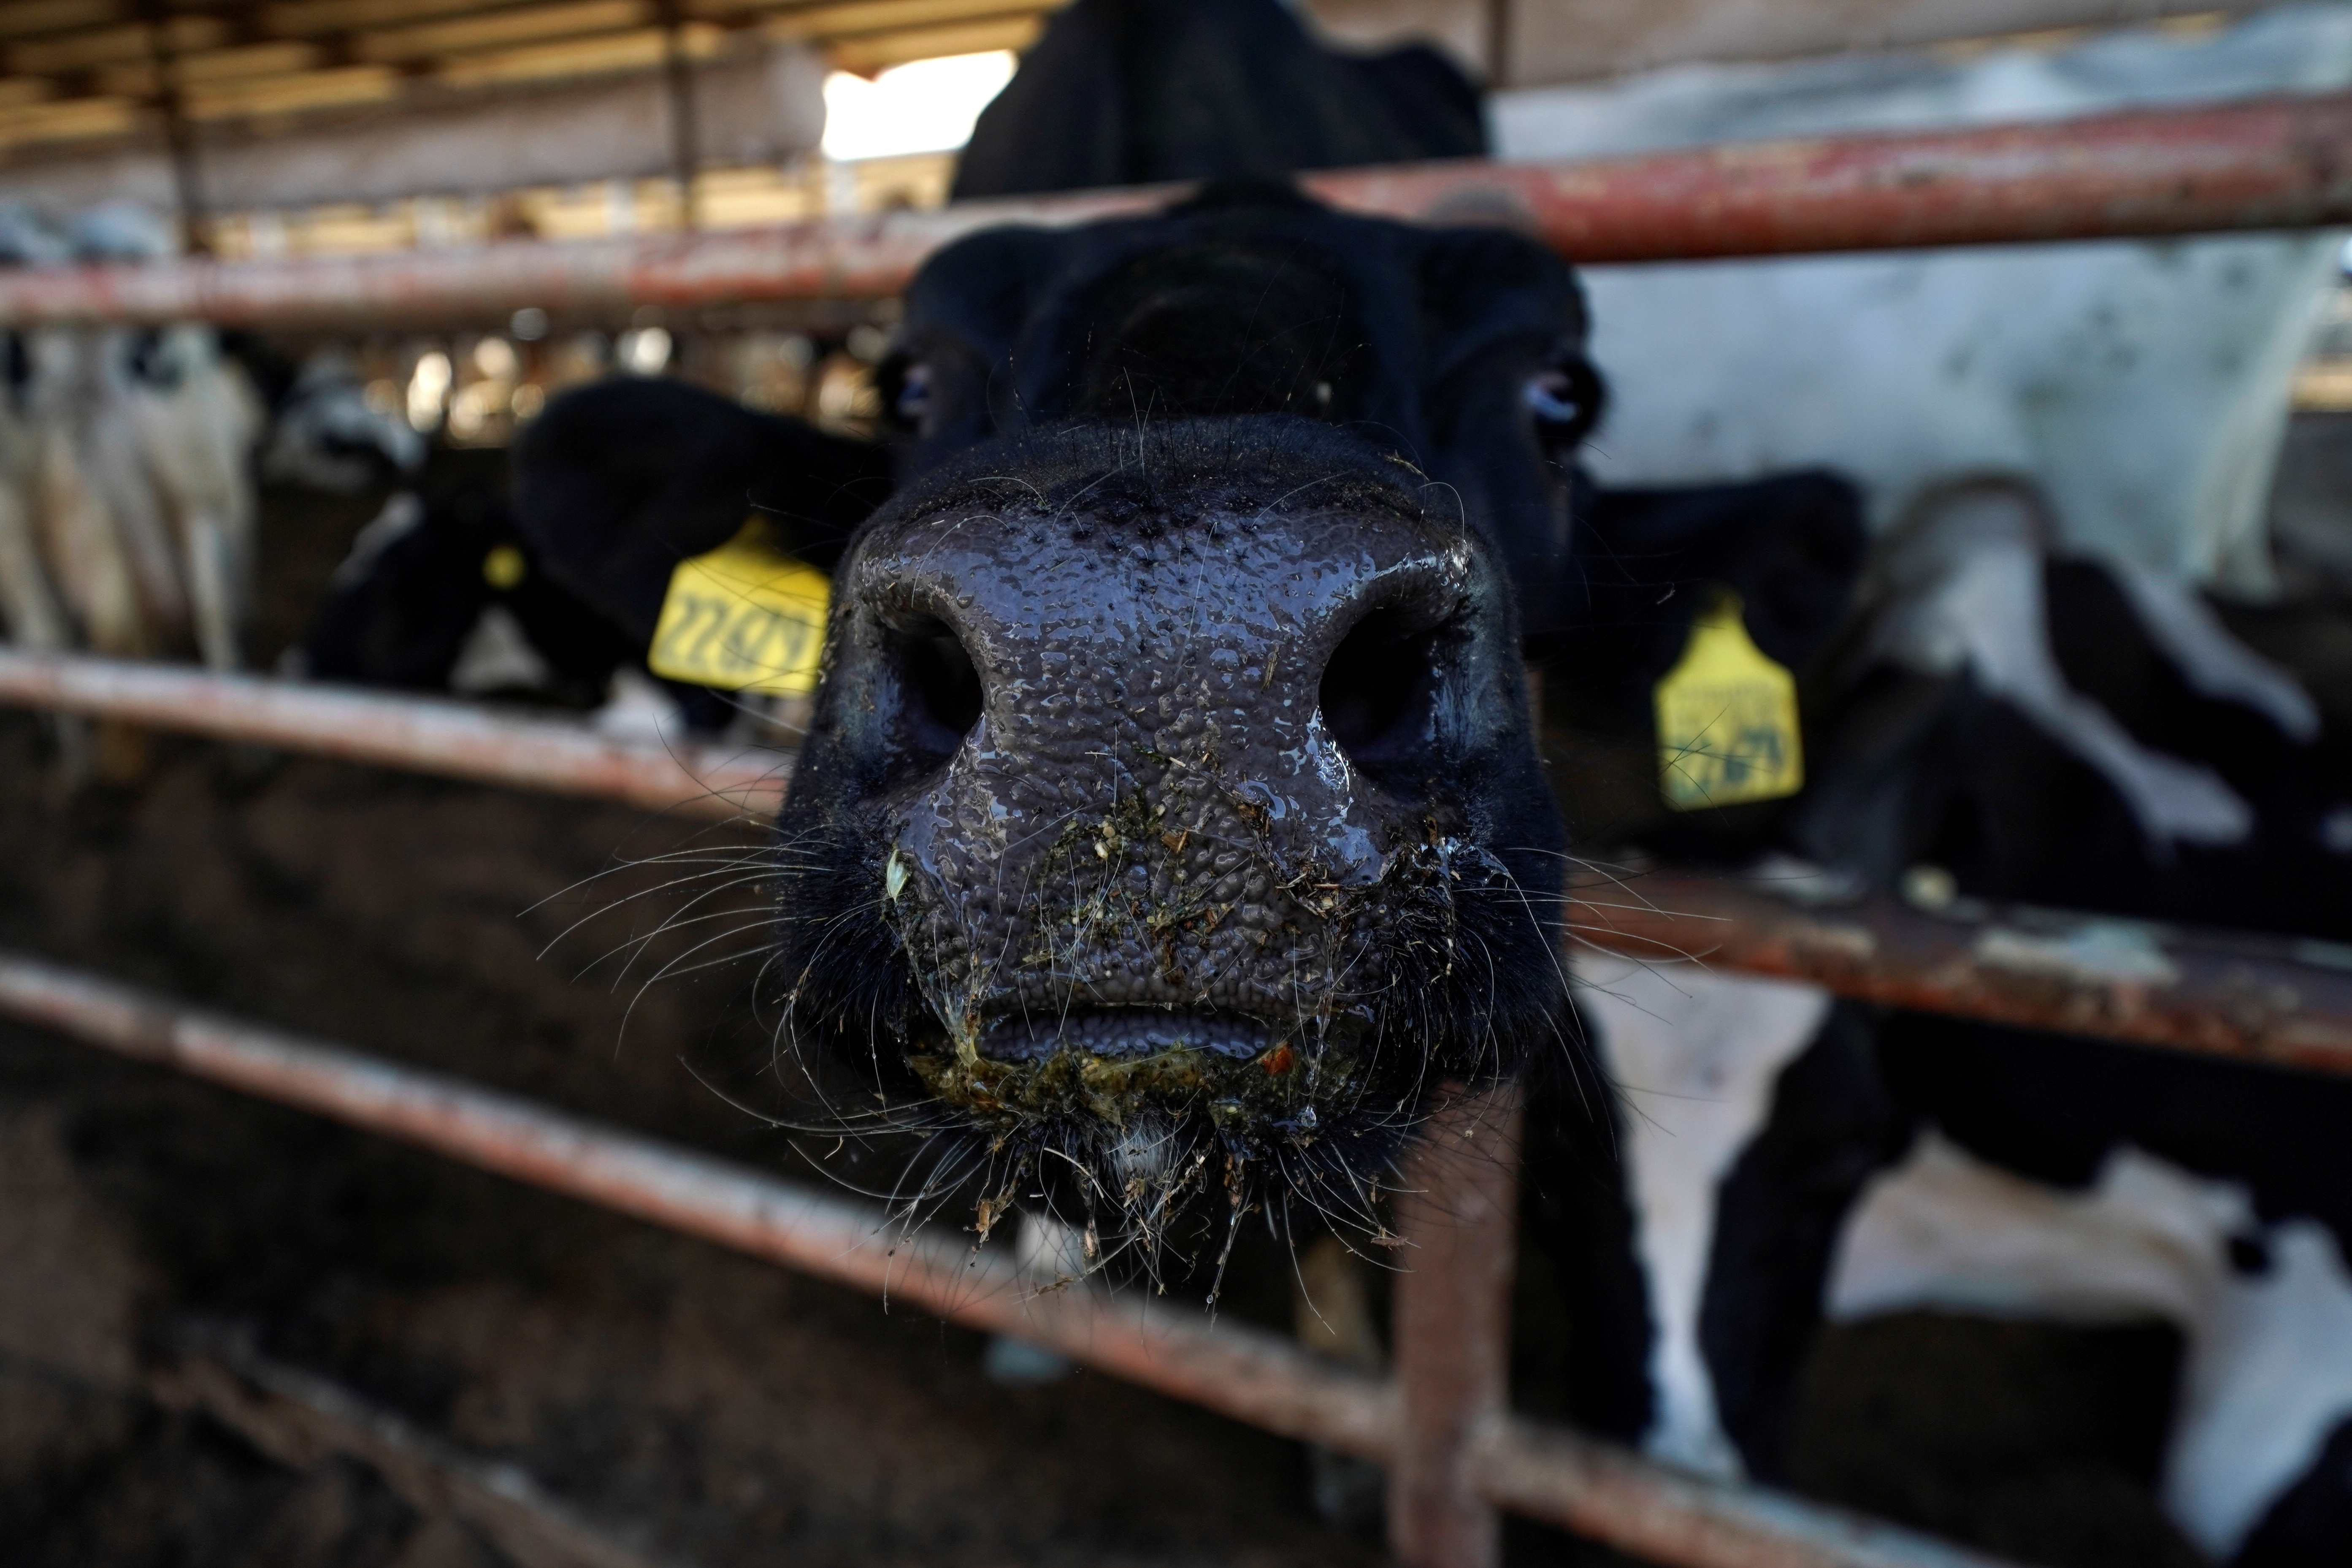 A Holstein cow looks out from a feeding pen at a dairy farm in Pixley, California